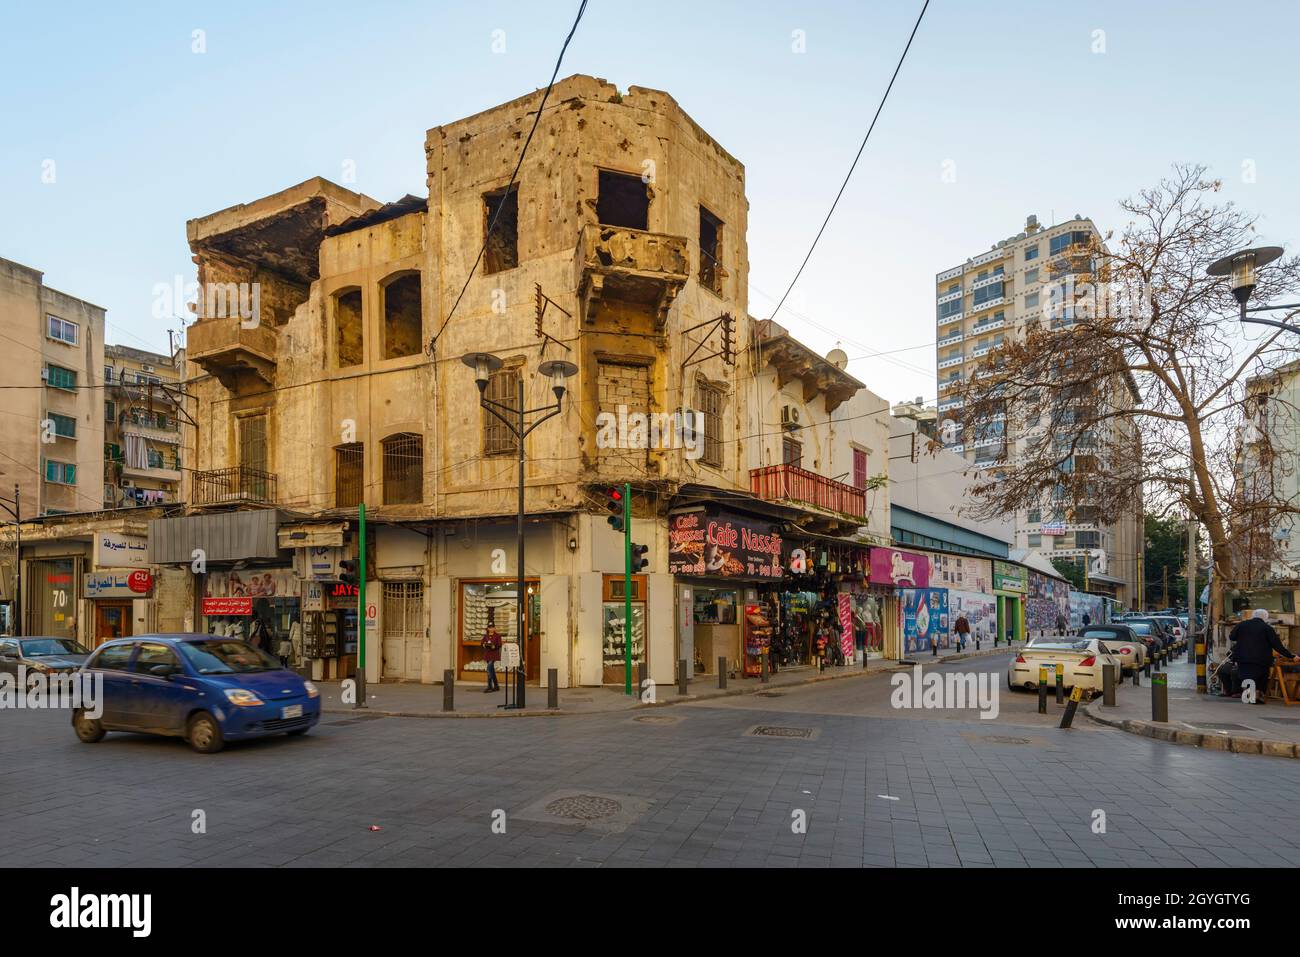 LEBANON, BEIRUT, MAZRAA, BUILDING WITH BULLET HOLES AND TRADE ON THE GROUND FLOOR AT THE CORNER OF OUZAI AND MAZRAA STREETS Stock Photo